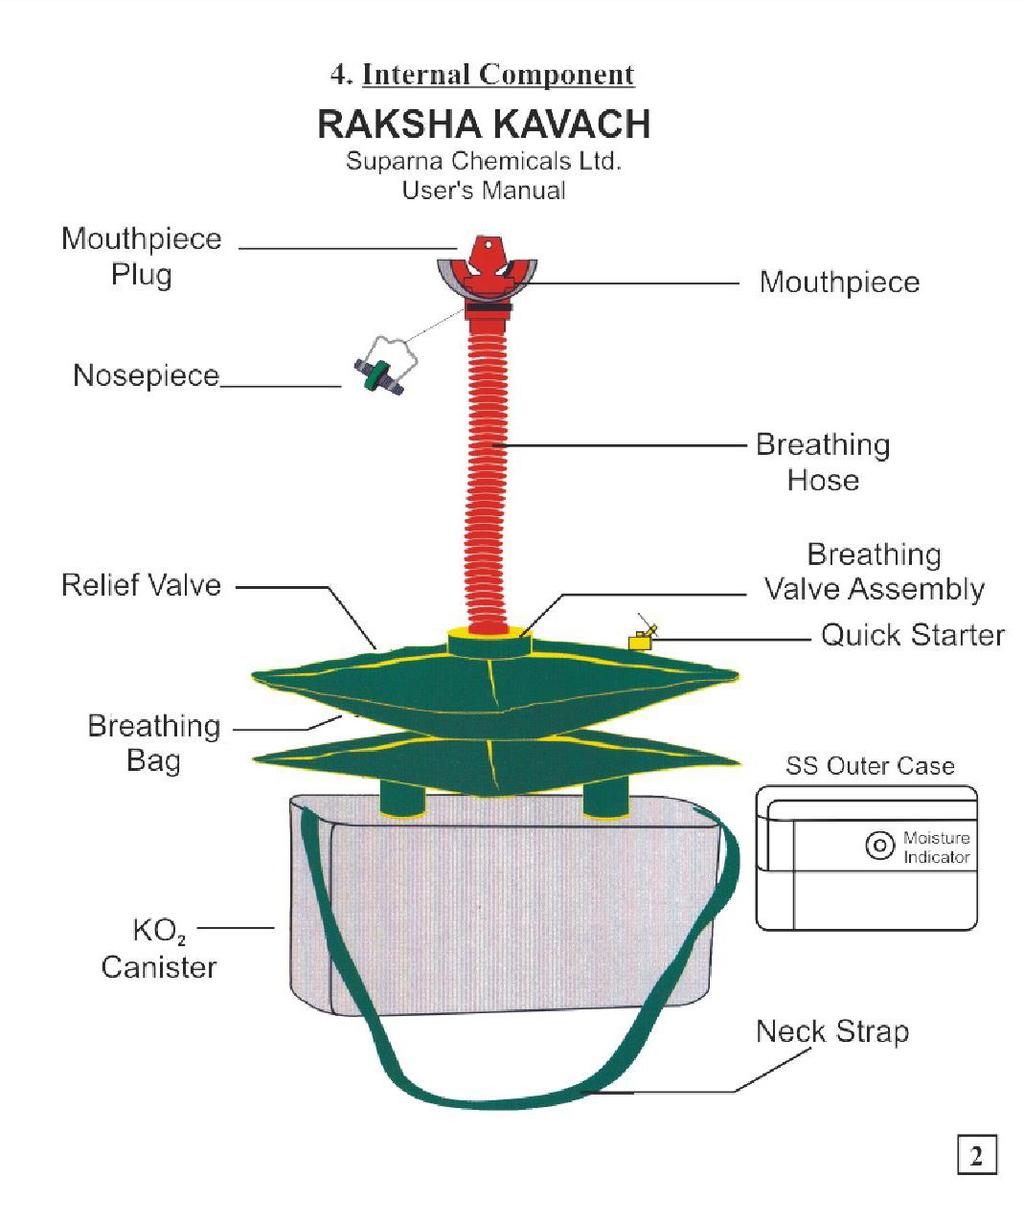 DESIGN: RAKSHA KAVACH is ideally suited for self rescue because of its small size, light weight and rugged construction.